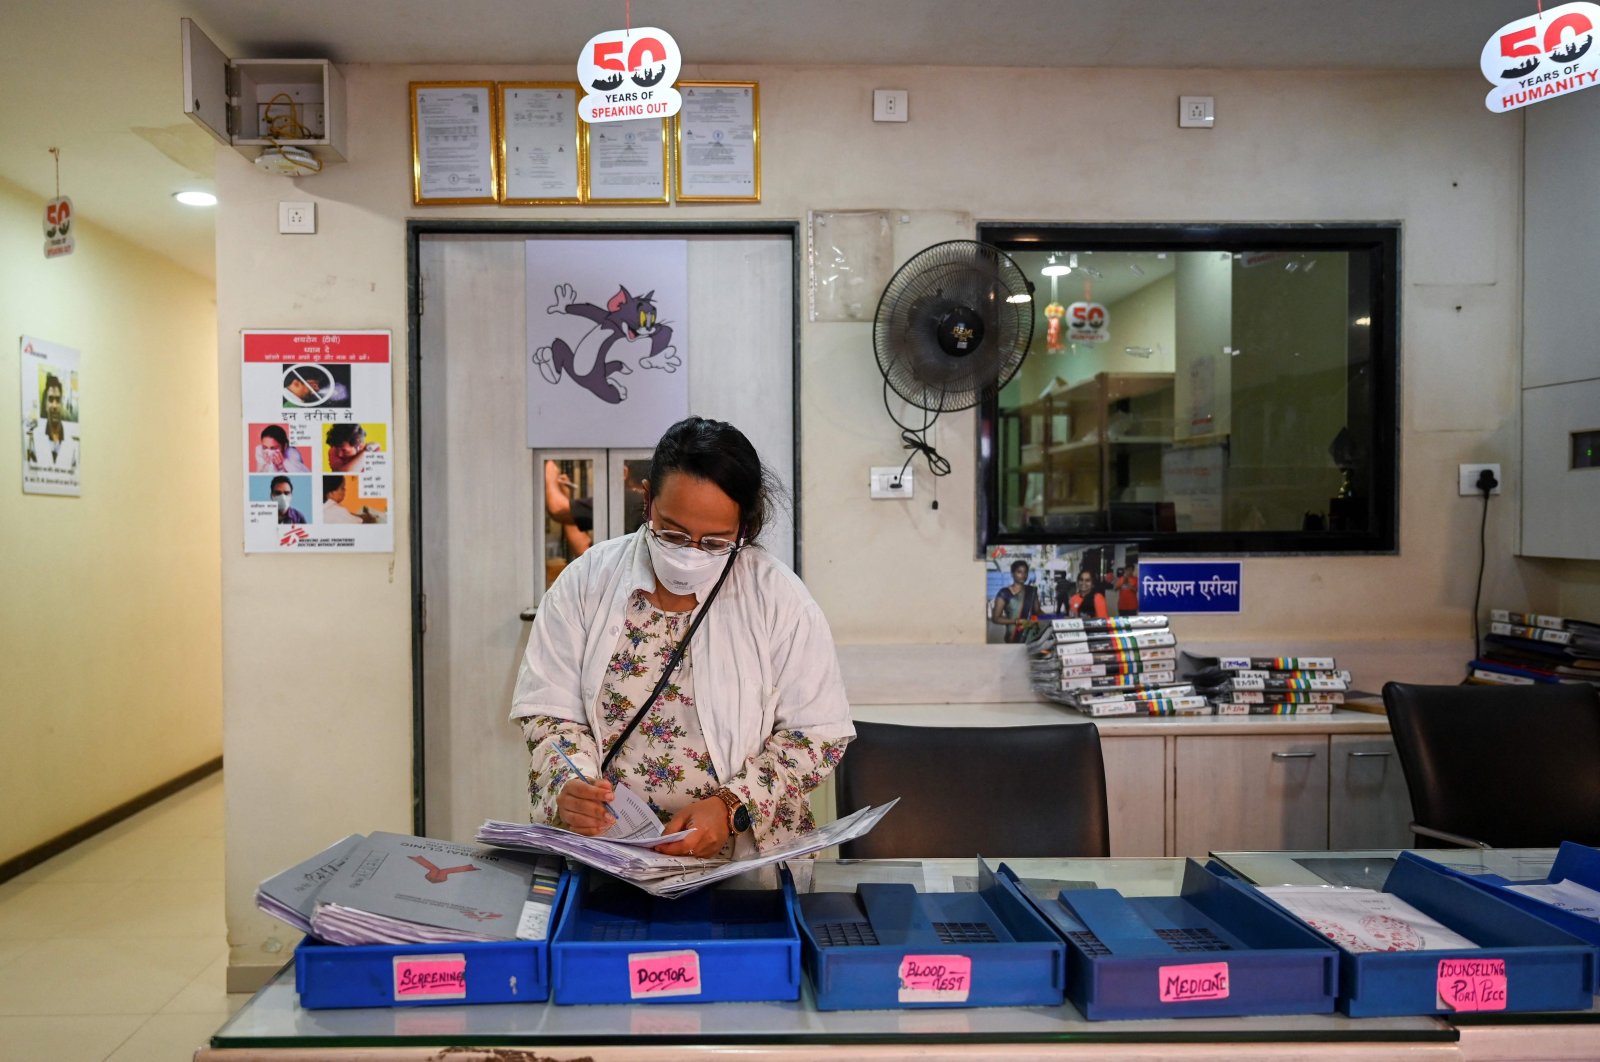 A doctor goes through medical files at a Doctors Without Borders (MSF) clinic that treats people with drug-resistant tuberculosis in Mumbai, India, March 22, 2022. (AFP Photo)